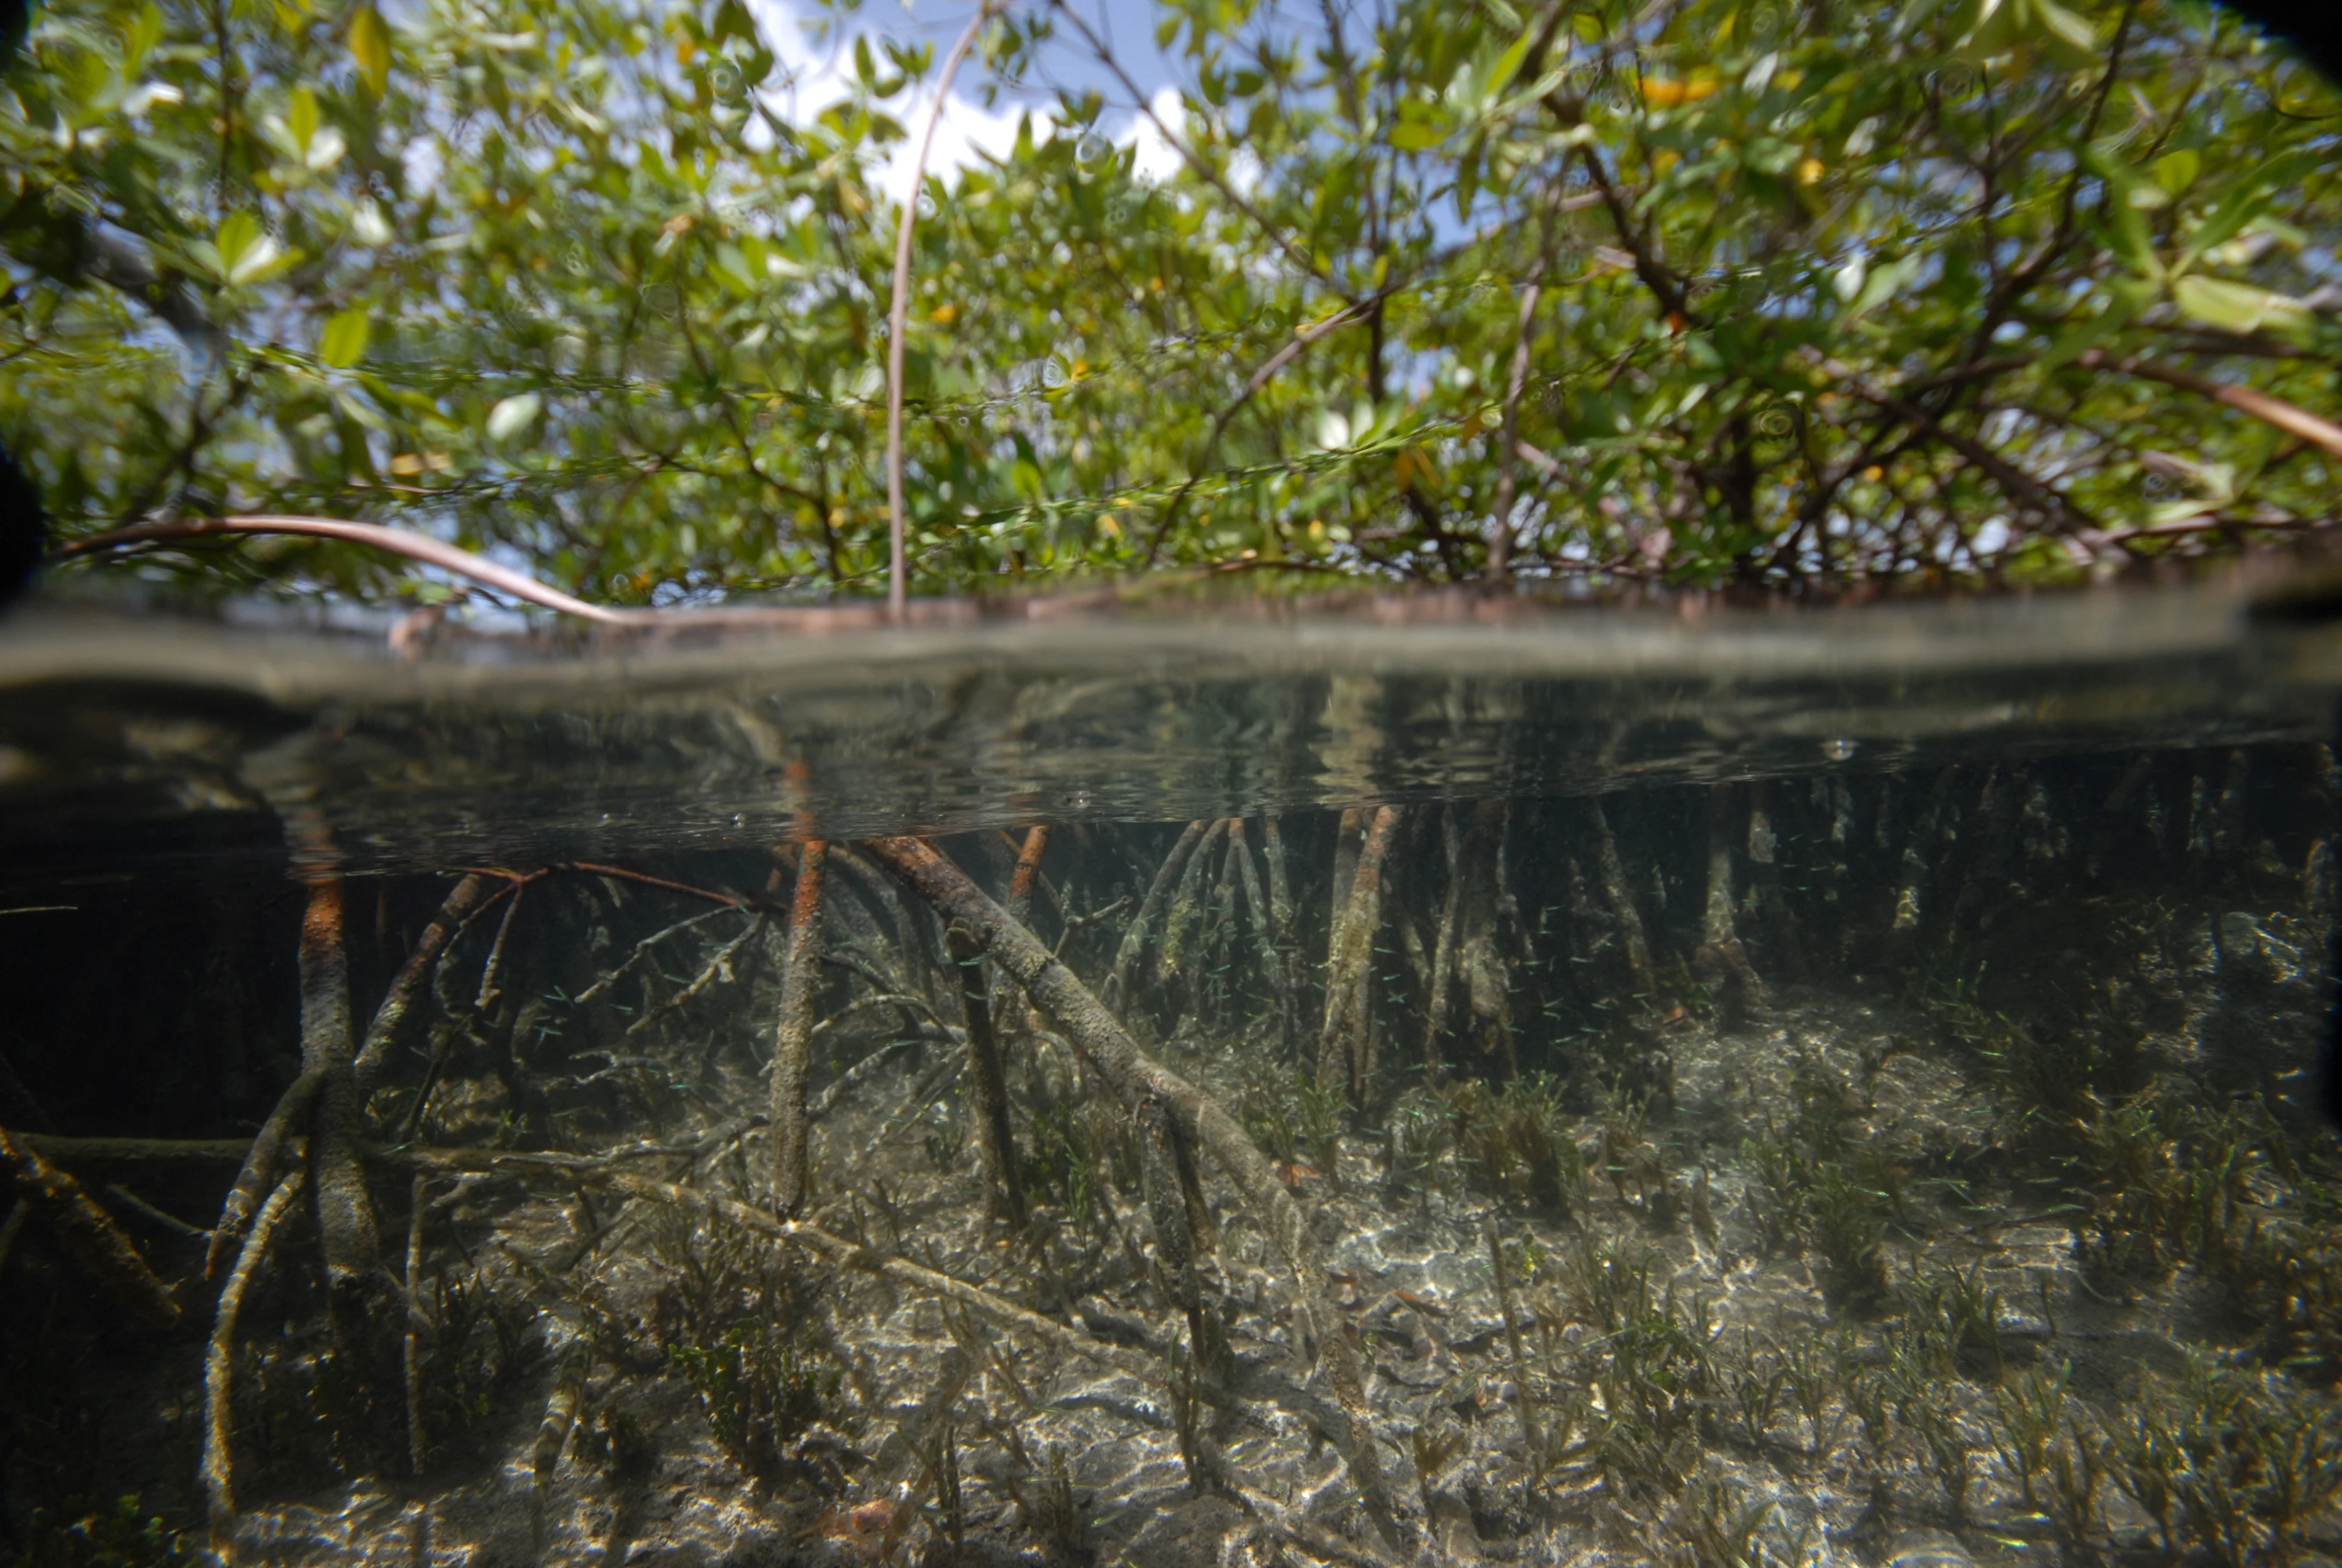 Reuters: A view of a sampling site among the mangroves of Guadeloupe, a French archipelago in the Caribbean, where the unusually large bacterium Thiomargarita magnifica was found, is seen in this undated handout image. Researchers at the U.S. Department of Energy Joint Genome Institute, Lawrence Berkeley National Laboratory, the Laboratory for Research in Complex Systems and the Universite des Antilles have characterised a bacterium composed of a single cell that is 5,000 times larger than other bacteria. Pierre Yves Pascal/U.S. Department of Energy's Lawrence Berkeley National Laboratory/Handout via REUTERS